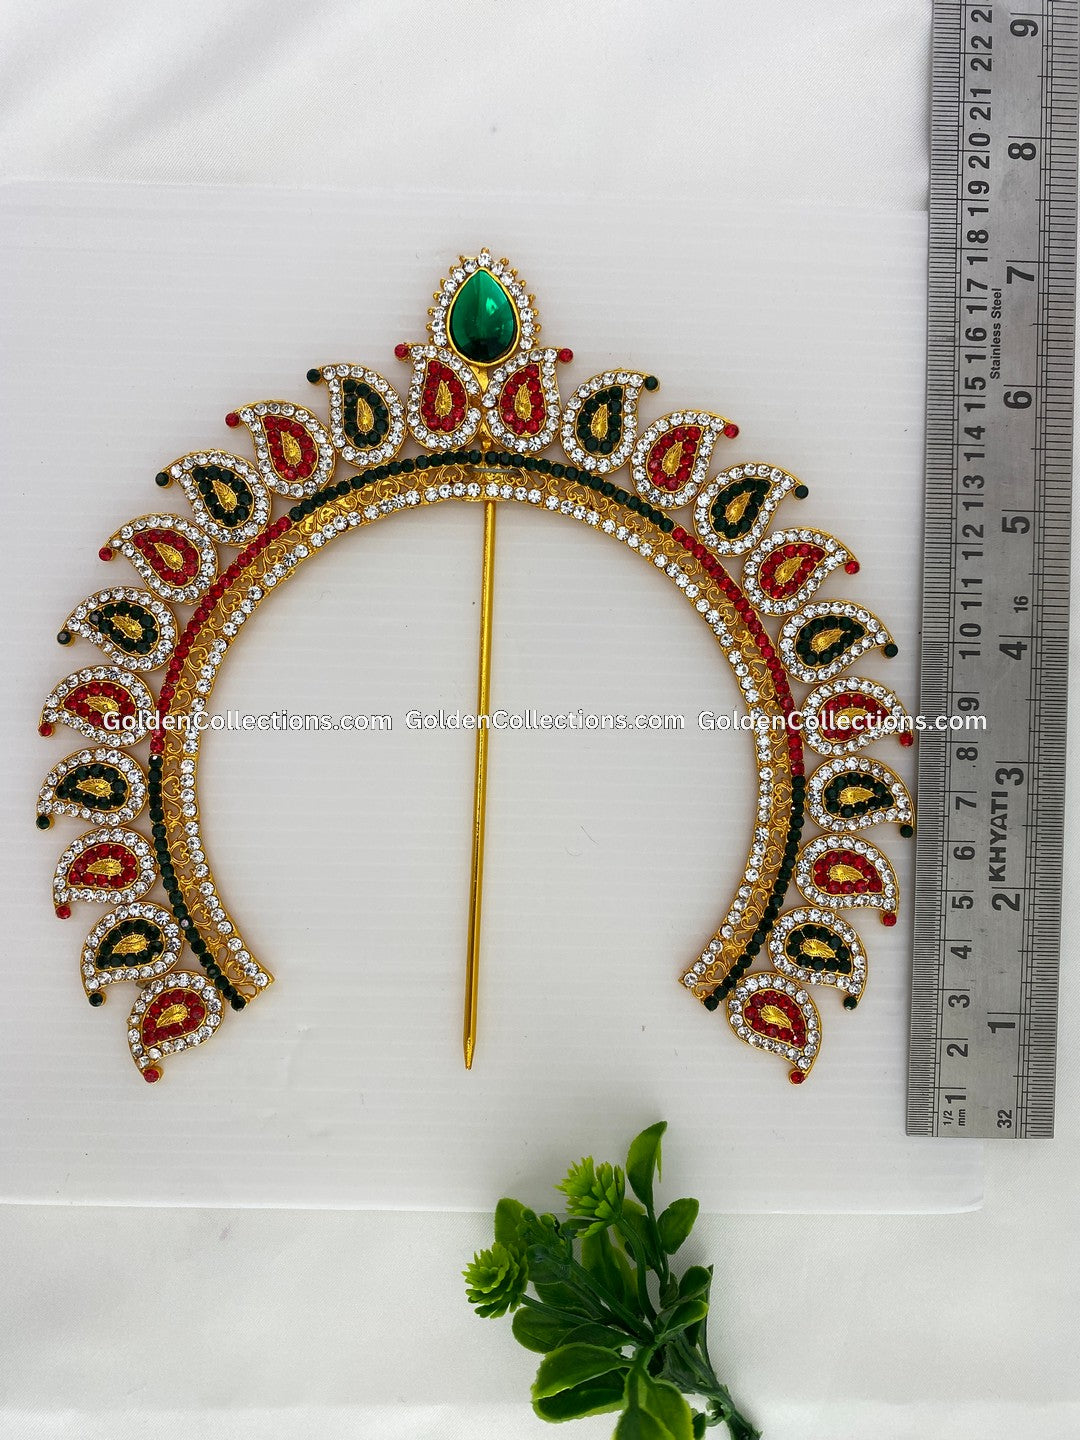 Goddess Jewelry Arch - Divine Ornaments - GoldenCollections GGA-013 3